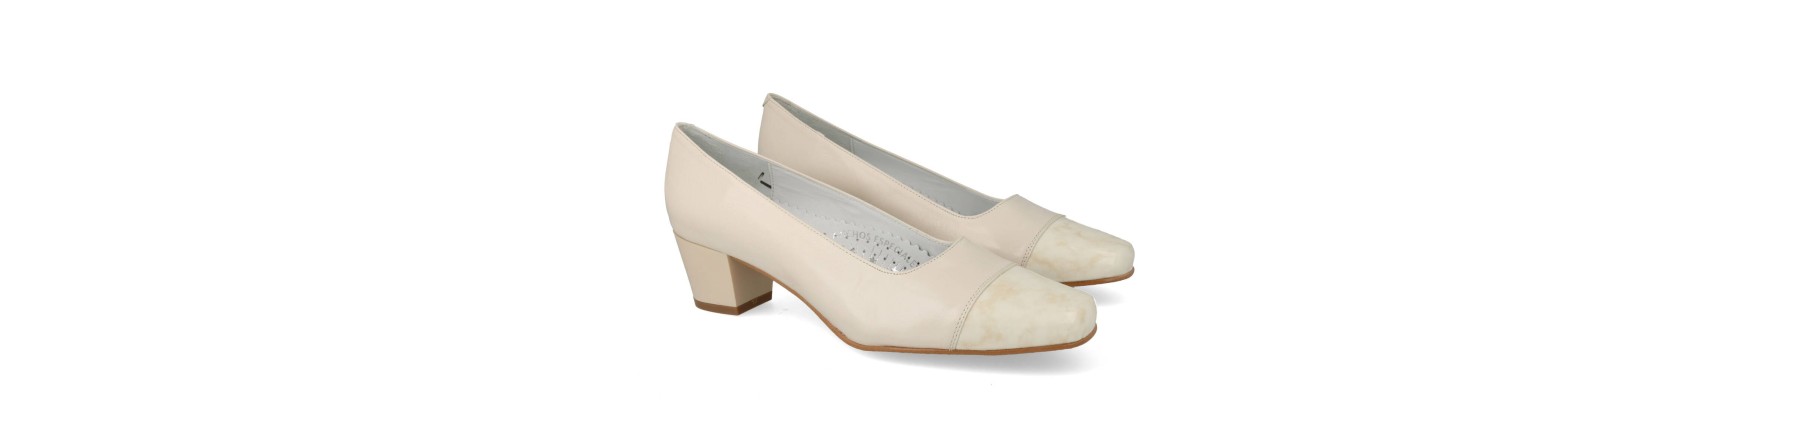 ZAPATOS OUTLET MUJER PEL MOD. KONG BEIGE